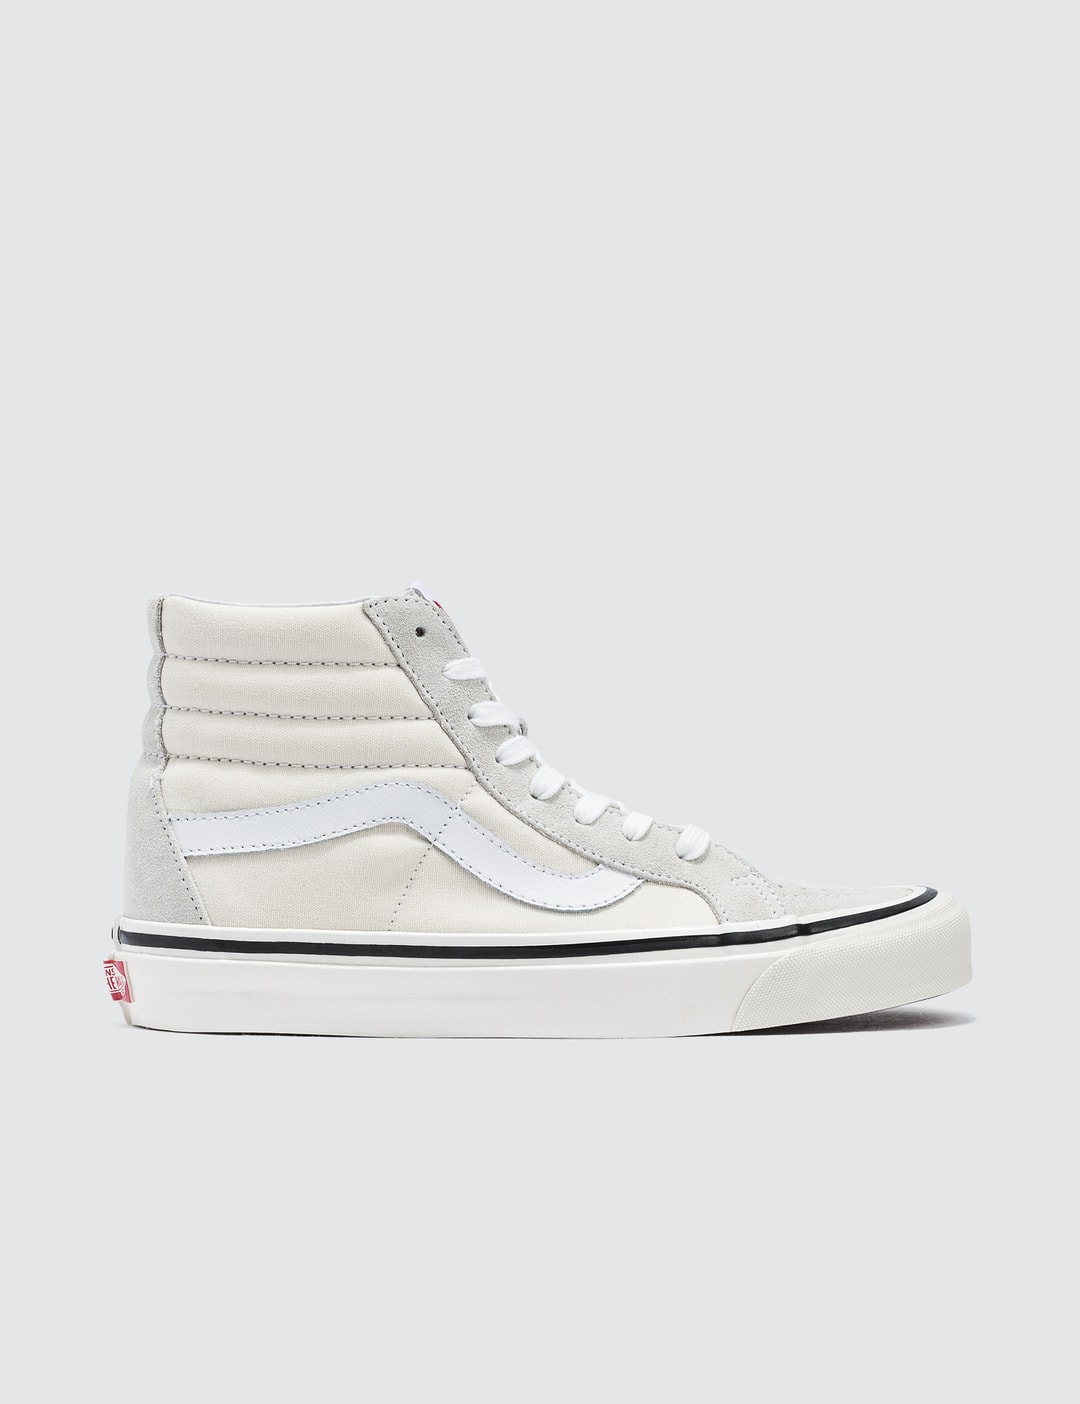 Vans - SK8-HI 38 Dx | HBX - Globally Curated Fashion and Lifestyle by ...